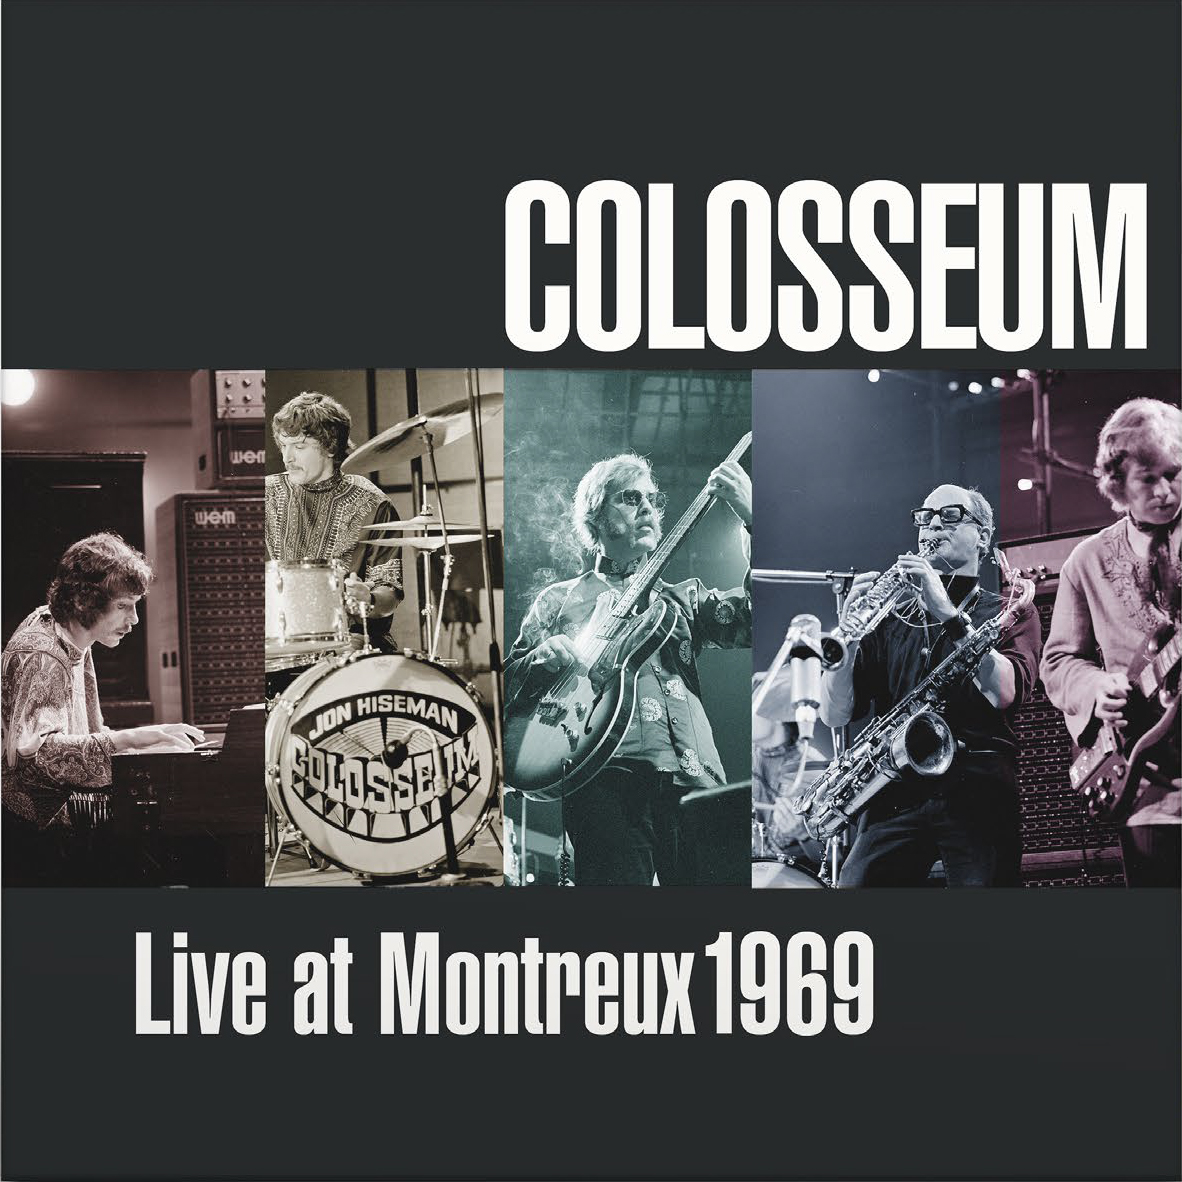 Colosseum – Live at Montreux 1969 CD/DVD